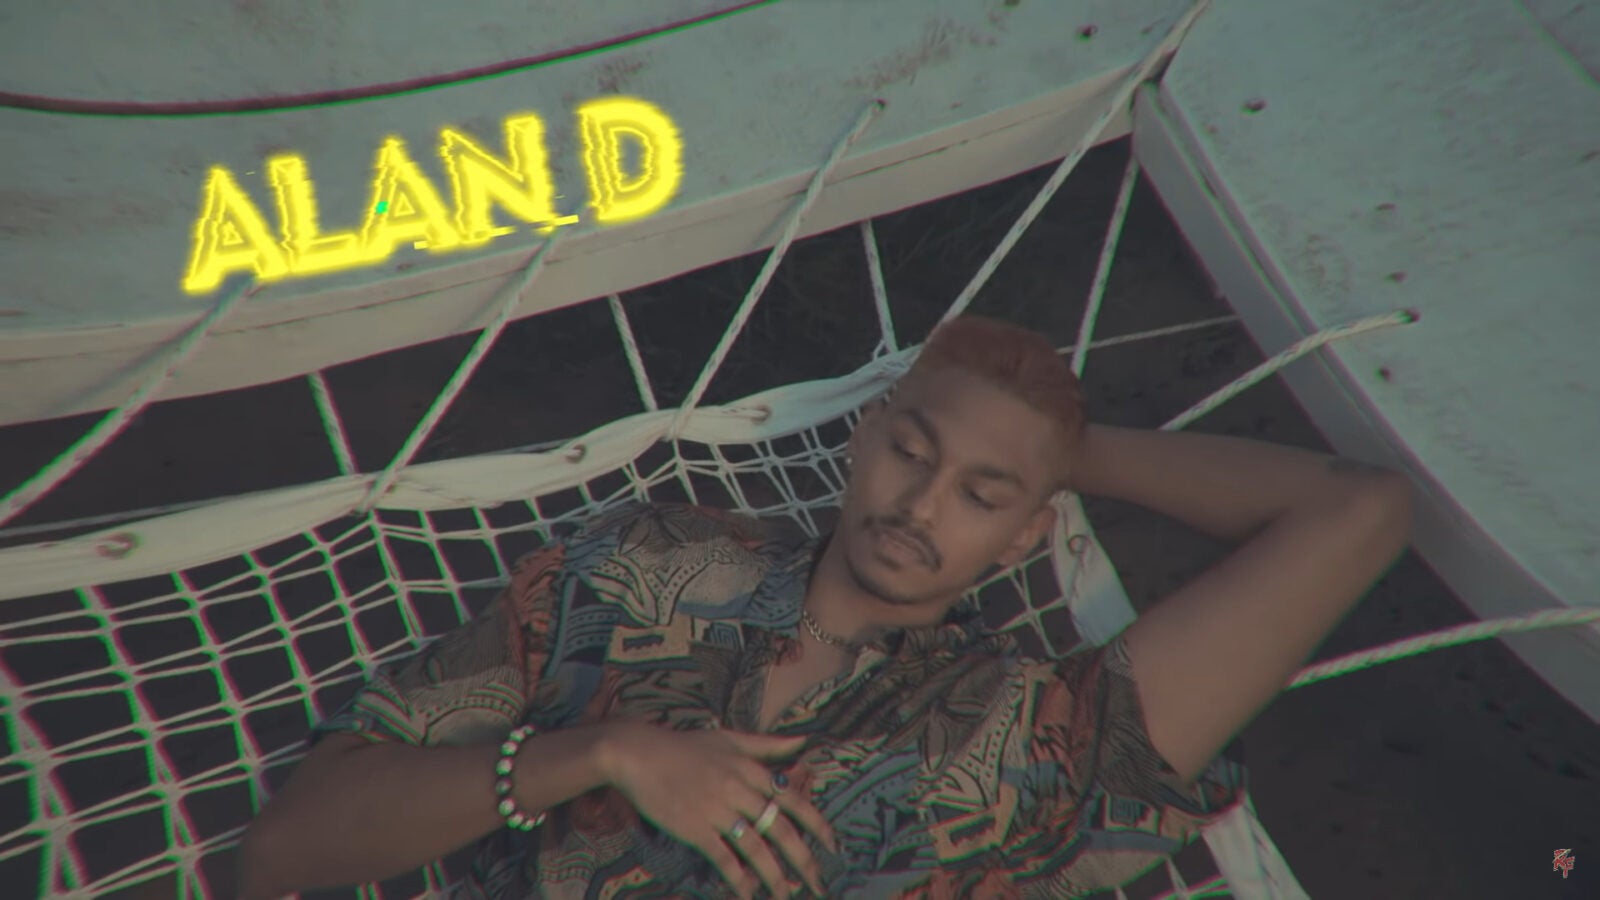 A Malaysian Indian Musician, Alan Durairaj laying down on a hammock in his music video IMSO with MK.